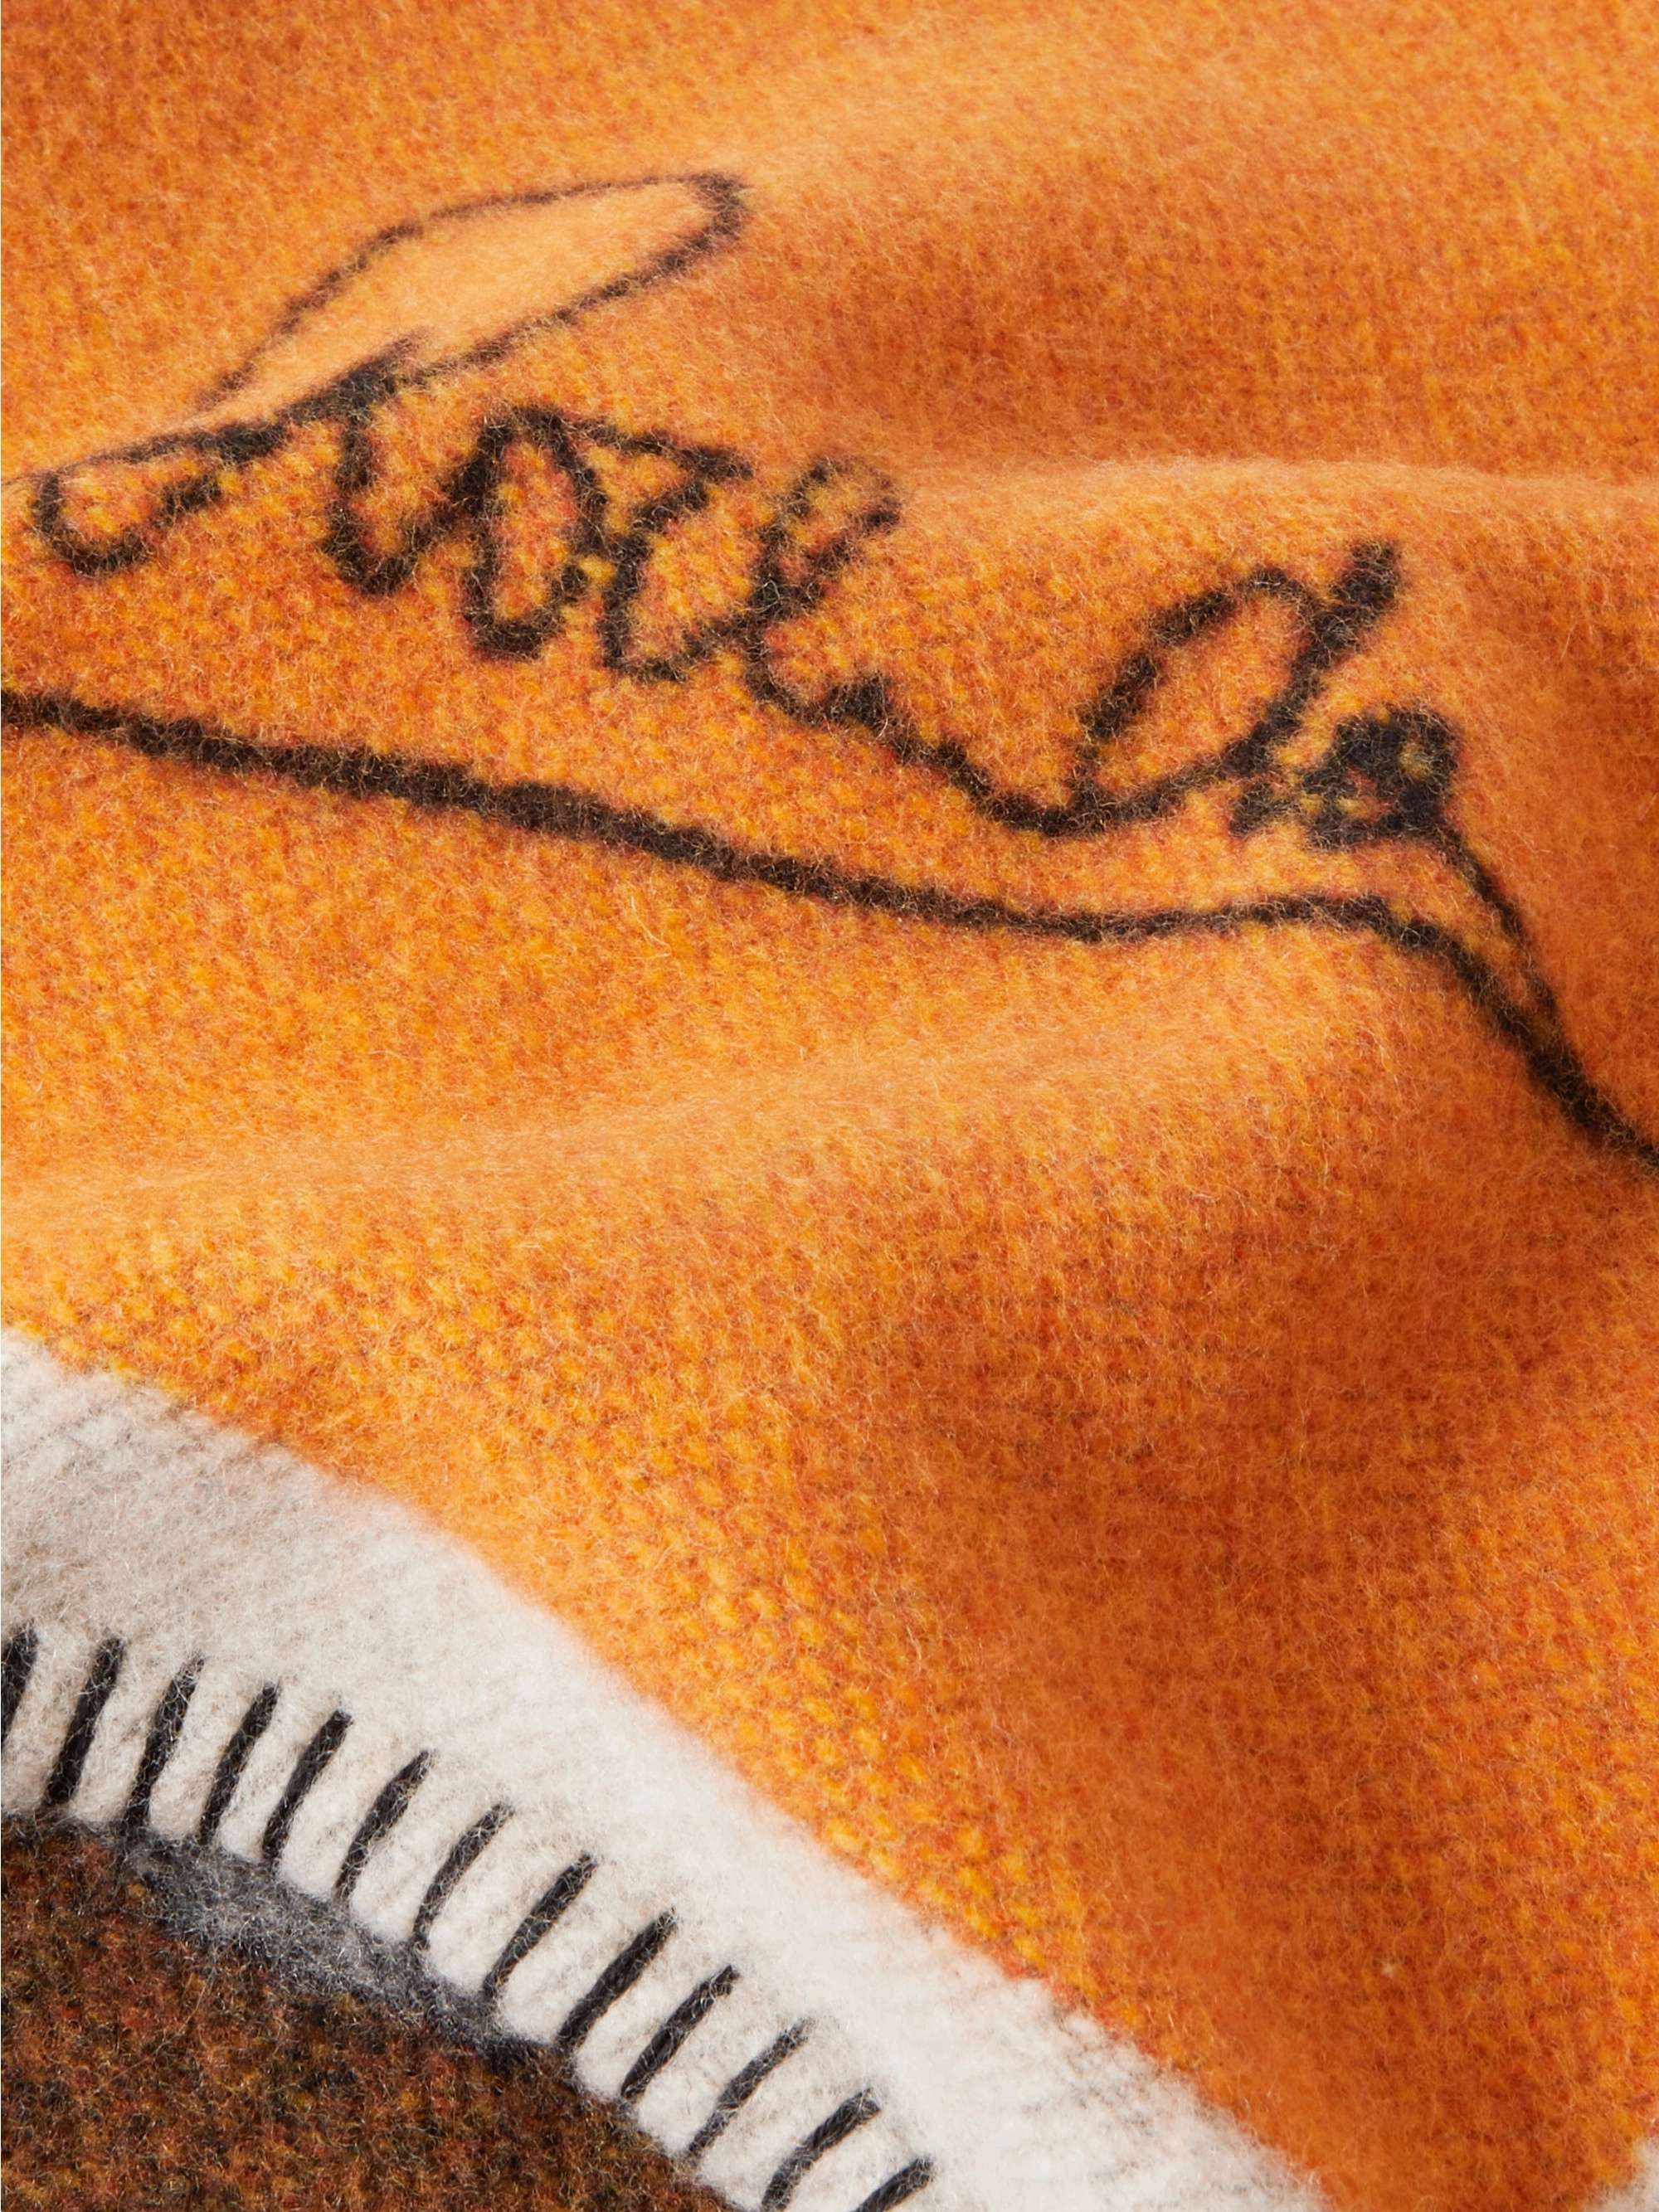 JW ANDERSON + Magdalene Odundo Intarsia Wool and Cashmere-Blend Blanket